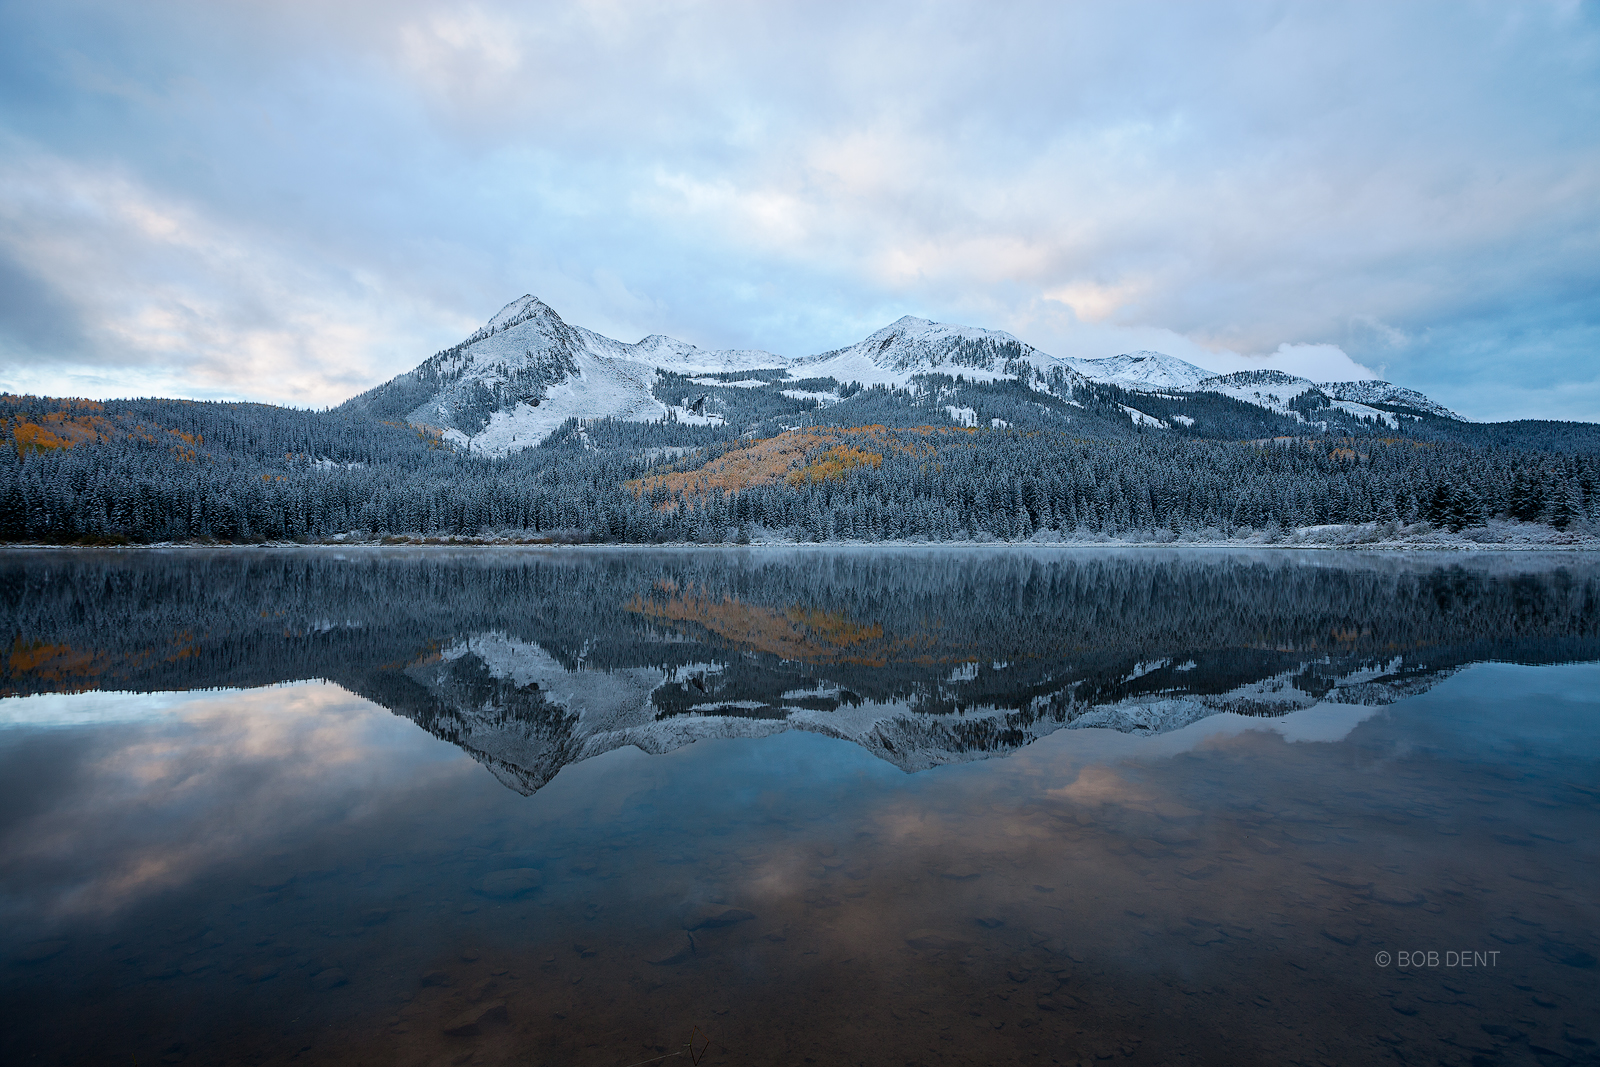 East Beckwith Mountain reflecting in Lost Lake Slough on a cold and snowy autumn morning.